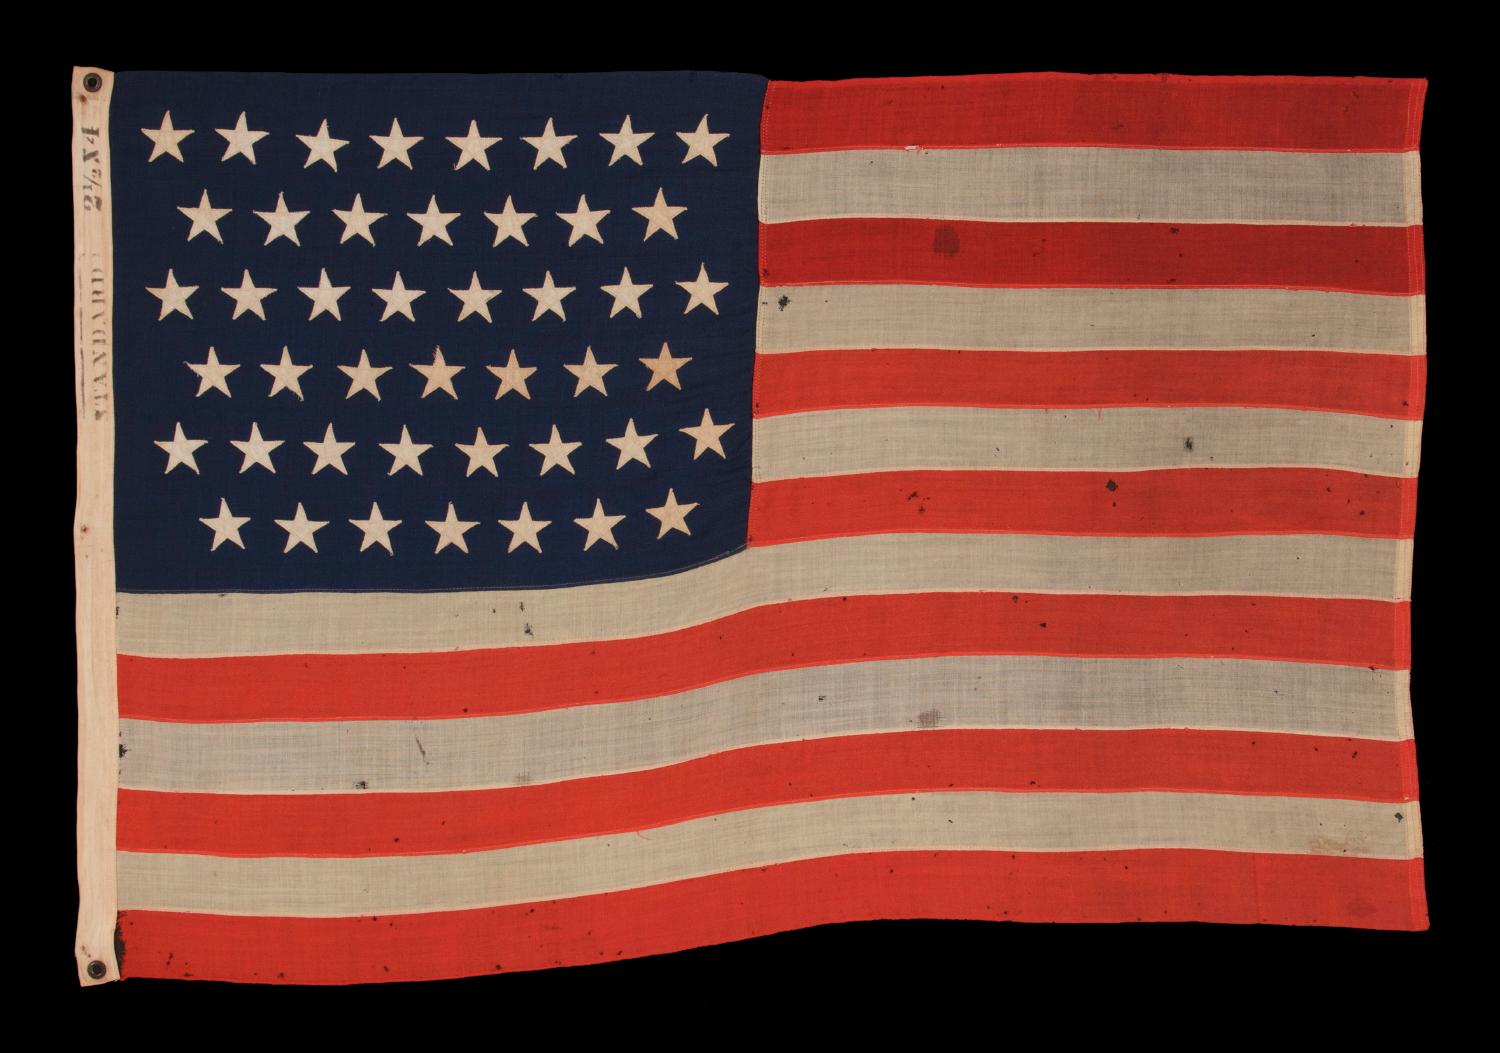 45 STARS ON AN ANTIQUE AMERICAN AMERICAN FLAG IN AN EXTREMELY SMALL SCALE AMONG EXAMPLES OF THE PERIOD WITH PIECED-AND-SEWN CONSTRUCTION, 1896-1907, SPANISH-AMERICAN WAR ERA, REFLECTS UTAH STATEHOOD

45 star American national flag, made in the